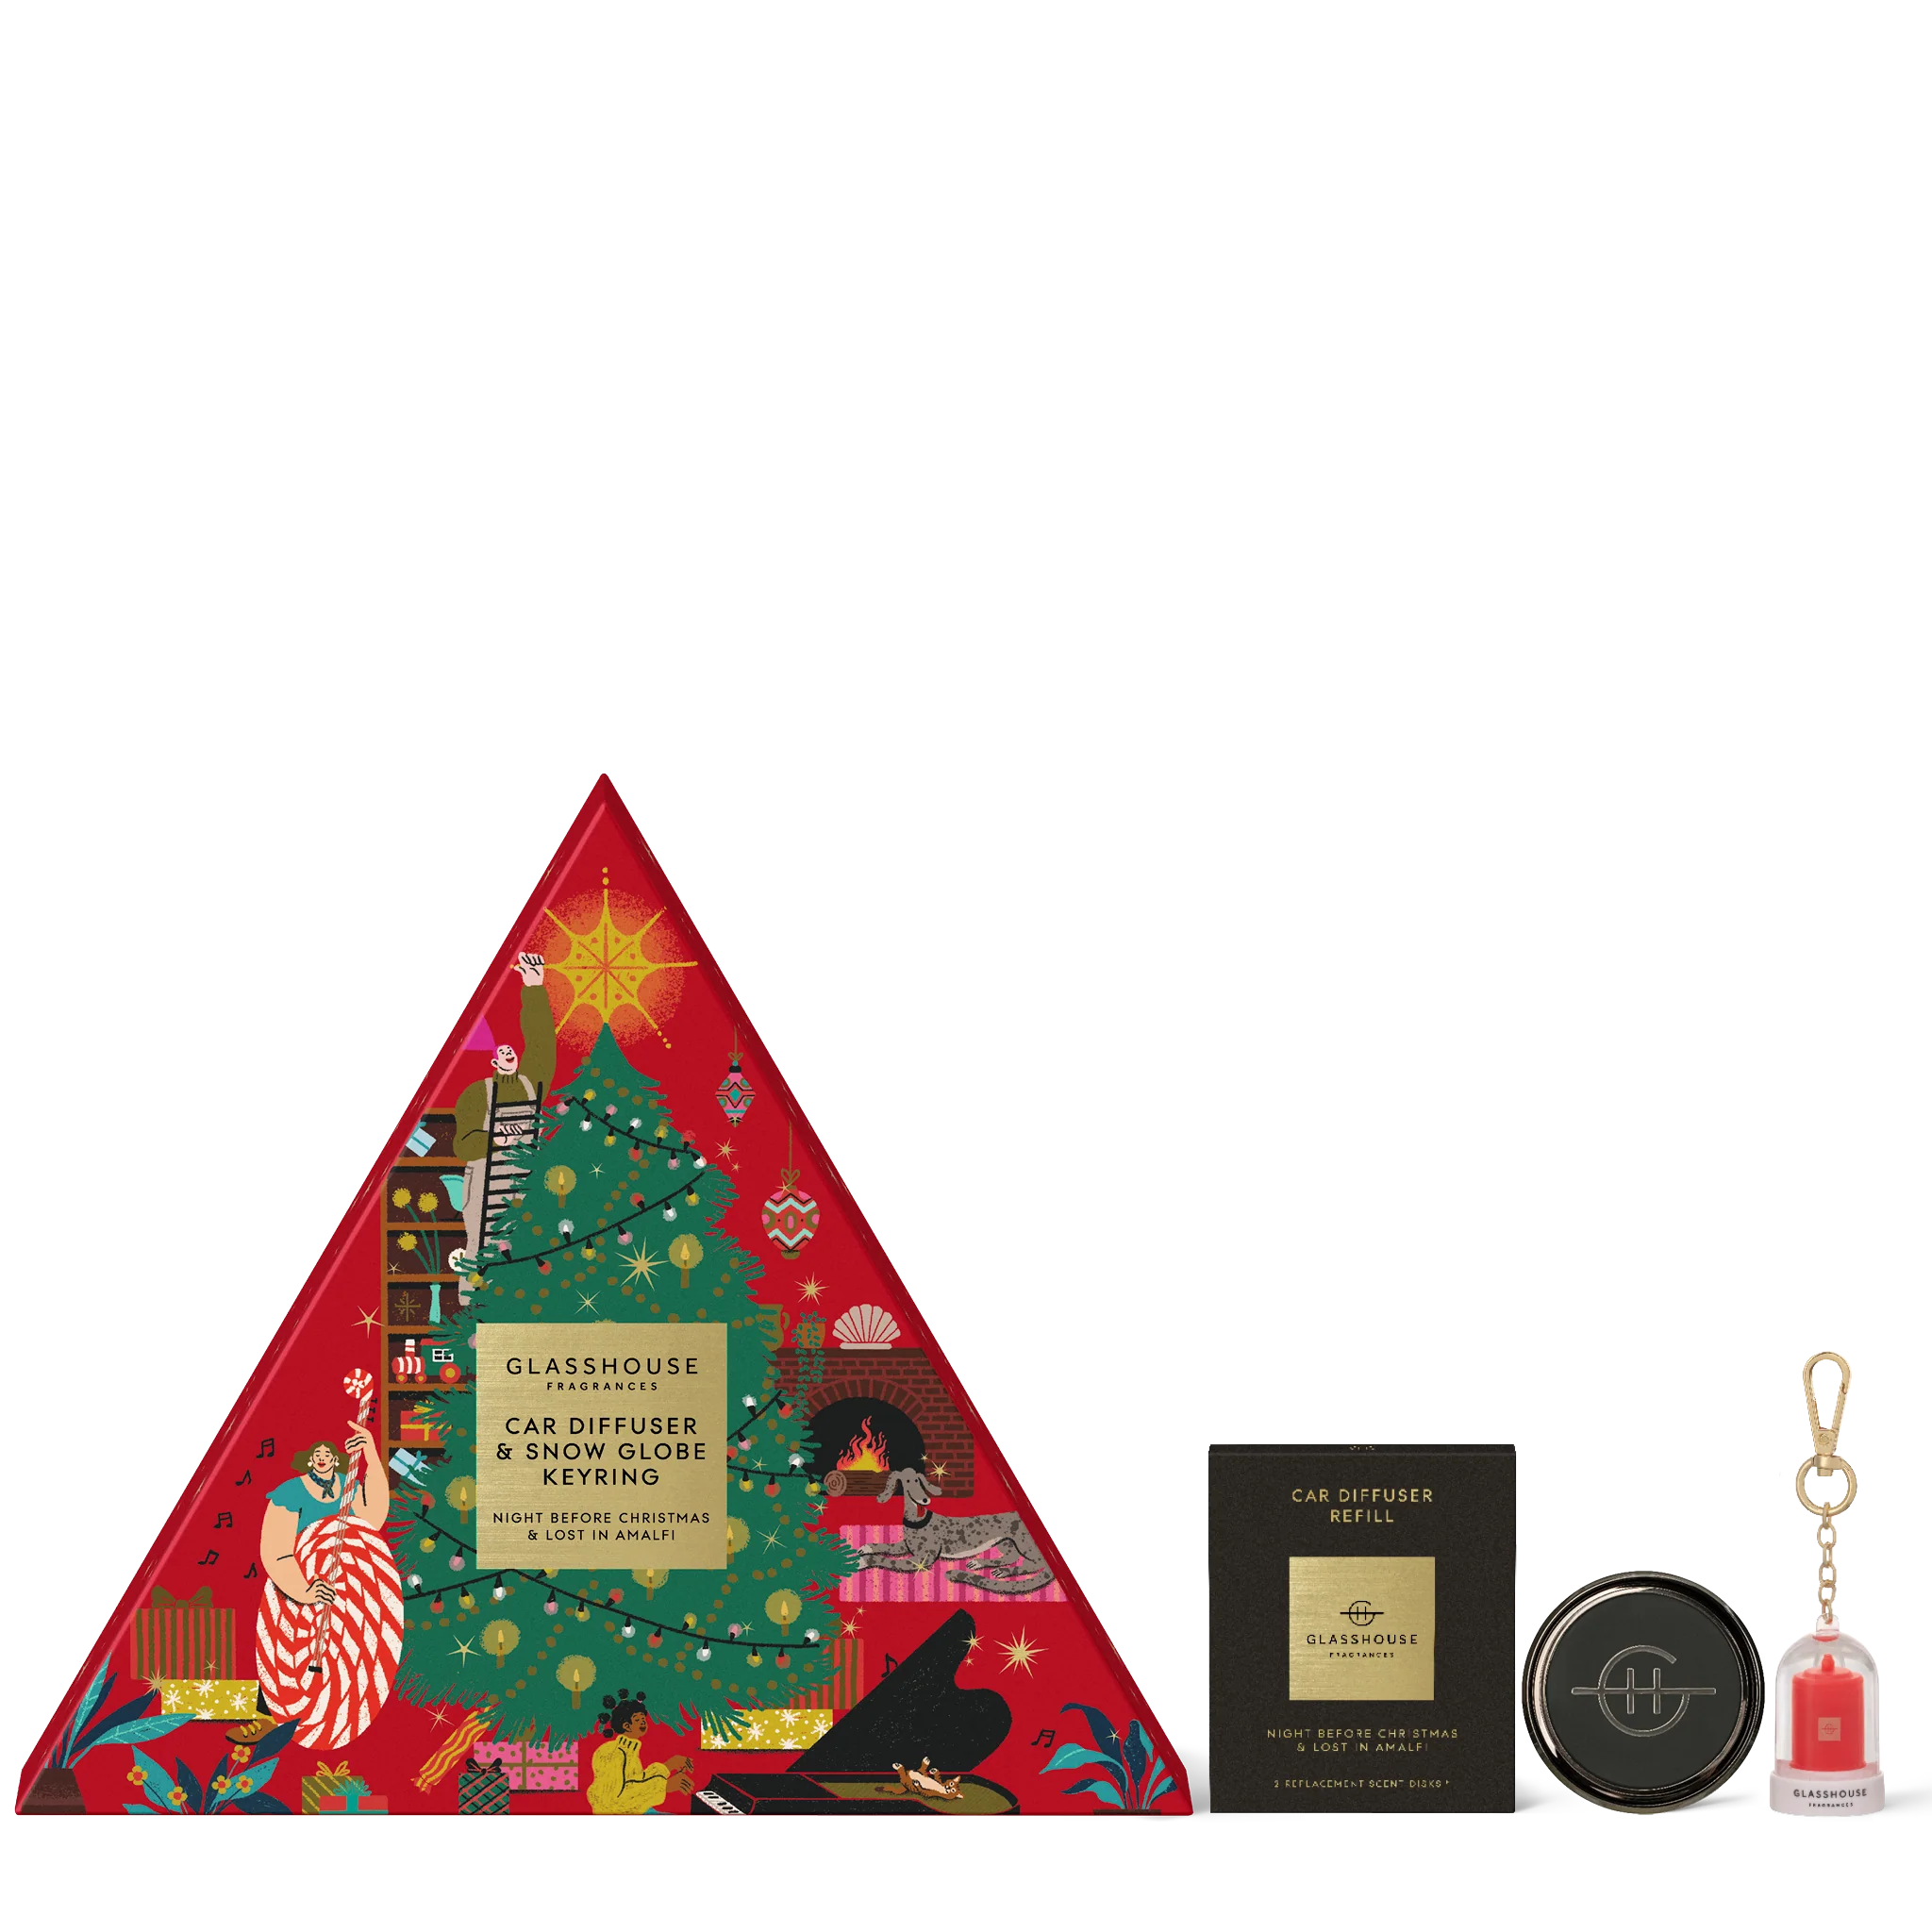 Car Diffuser | Night Before Christmas, Lost In Amalfi | Gift Set